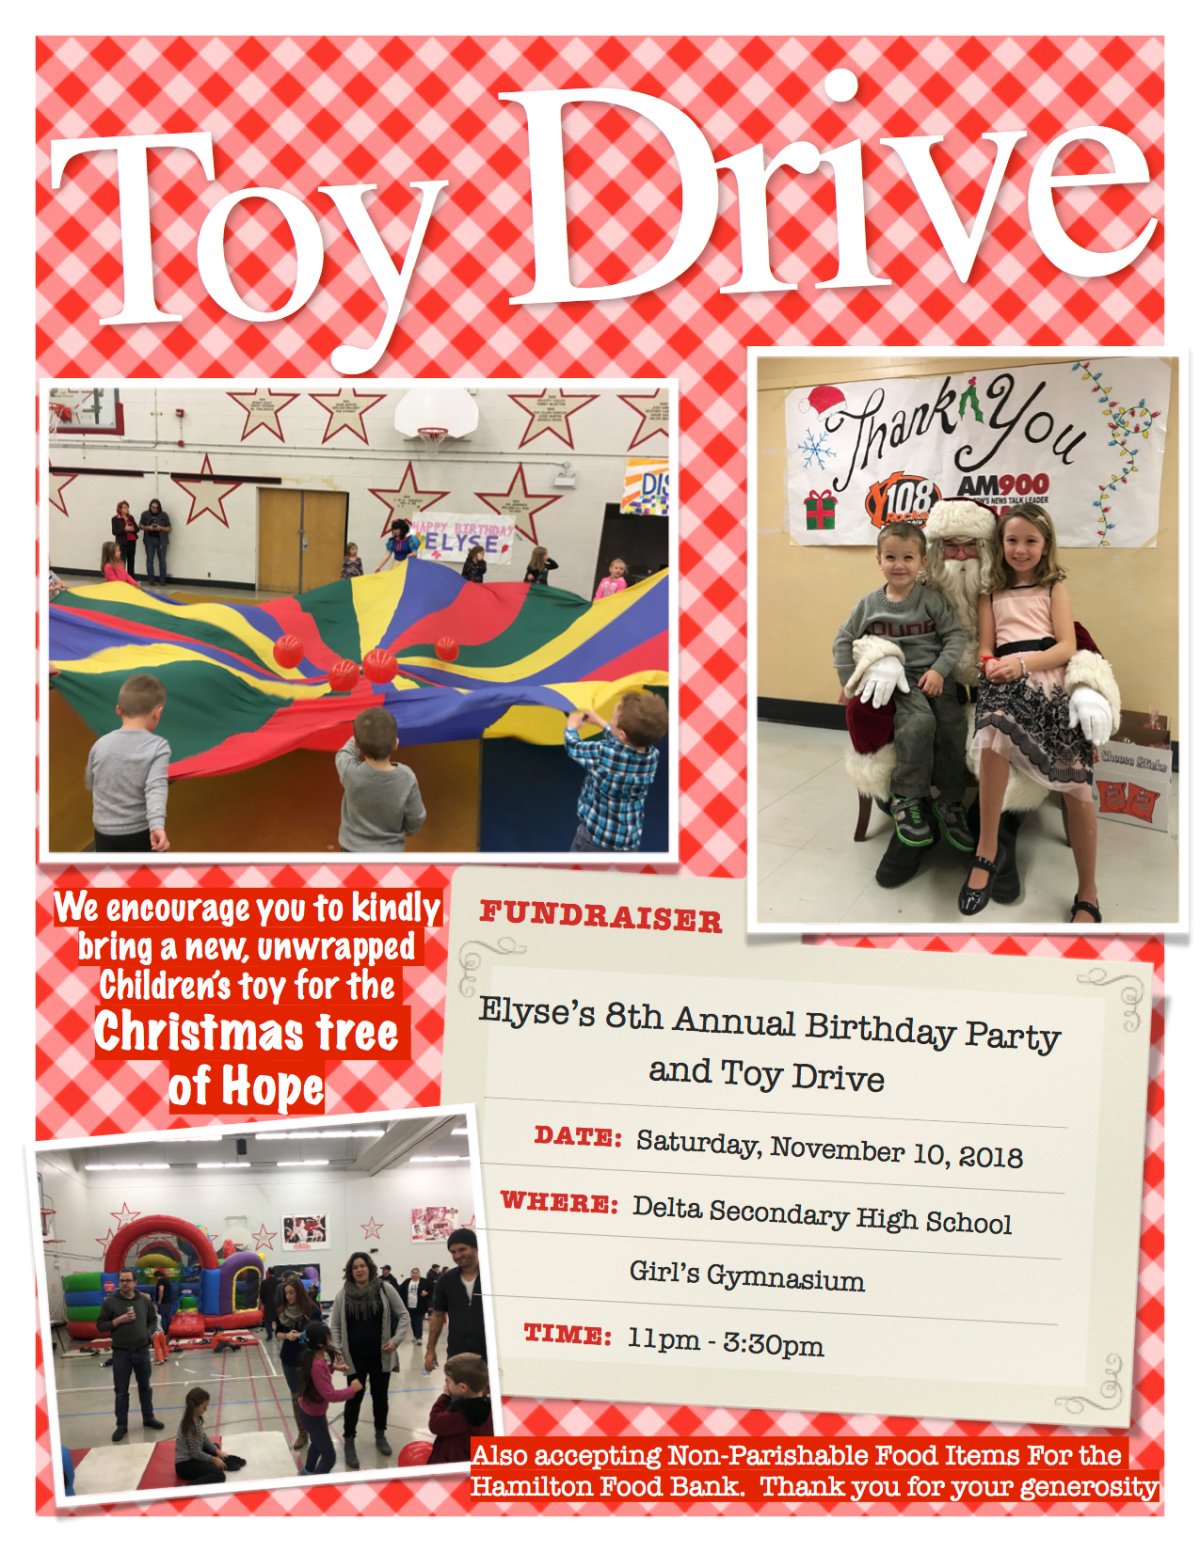 Elyse’s 8th Annual Birthday Party and Toy Drive - image